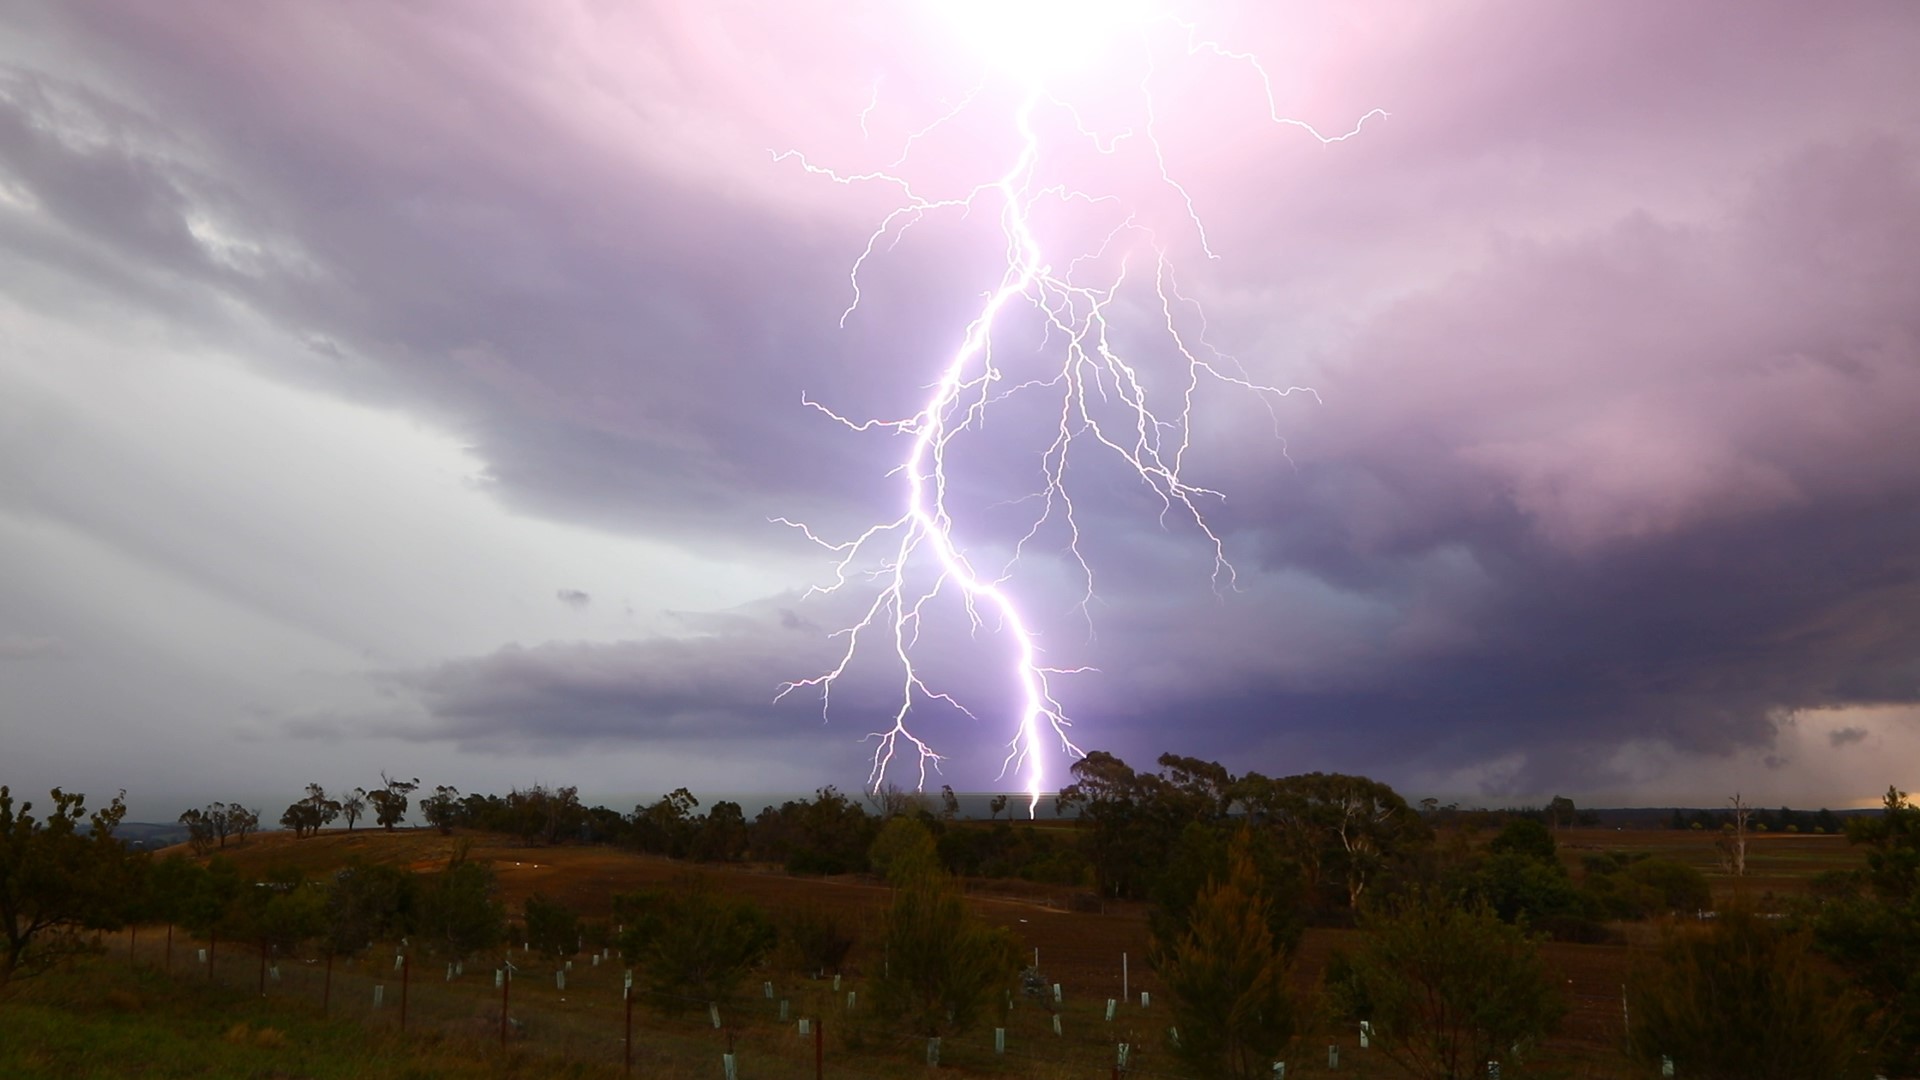 I year ago - a lightning barrage Southern Tablelands

Southern Tablelands near Moss Vale today! Just briefly an insane show! The best structure and li...